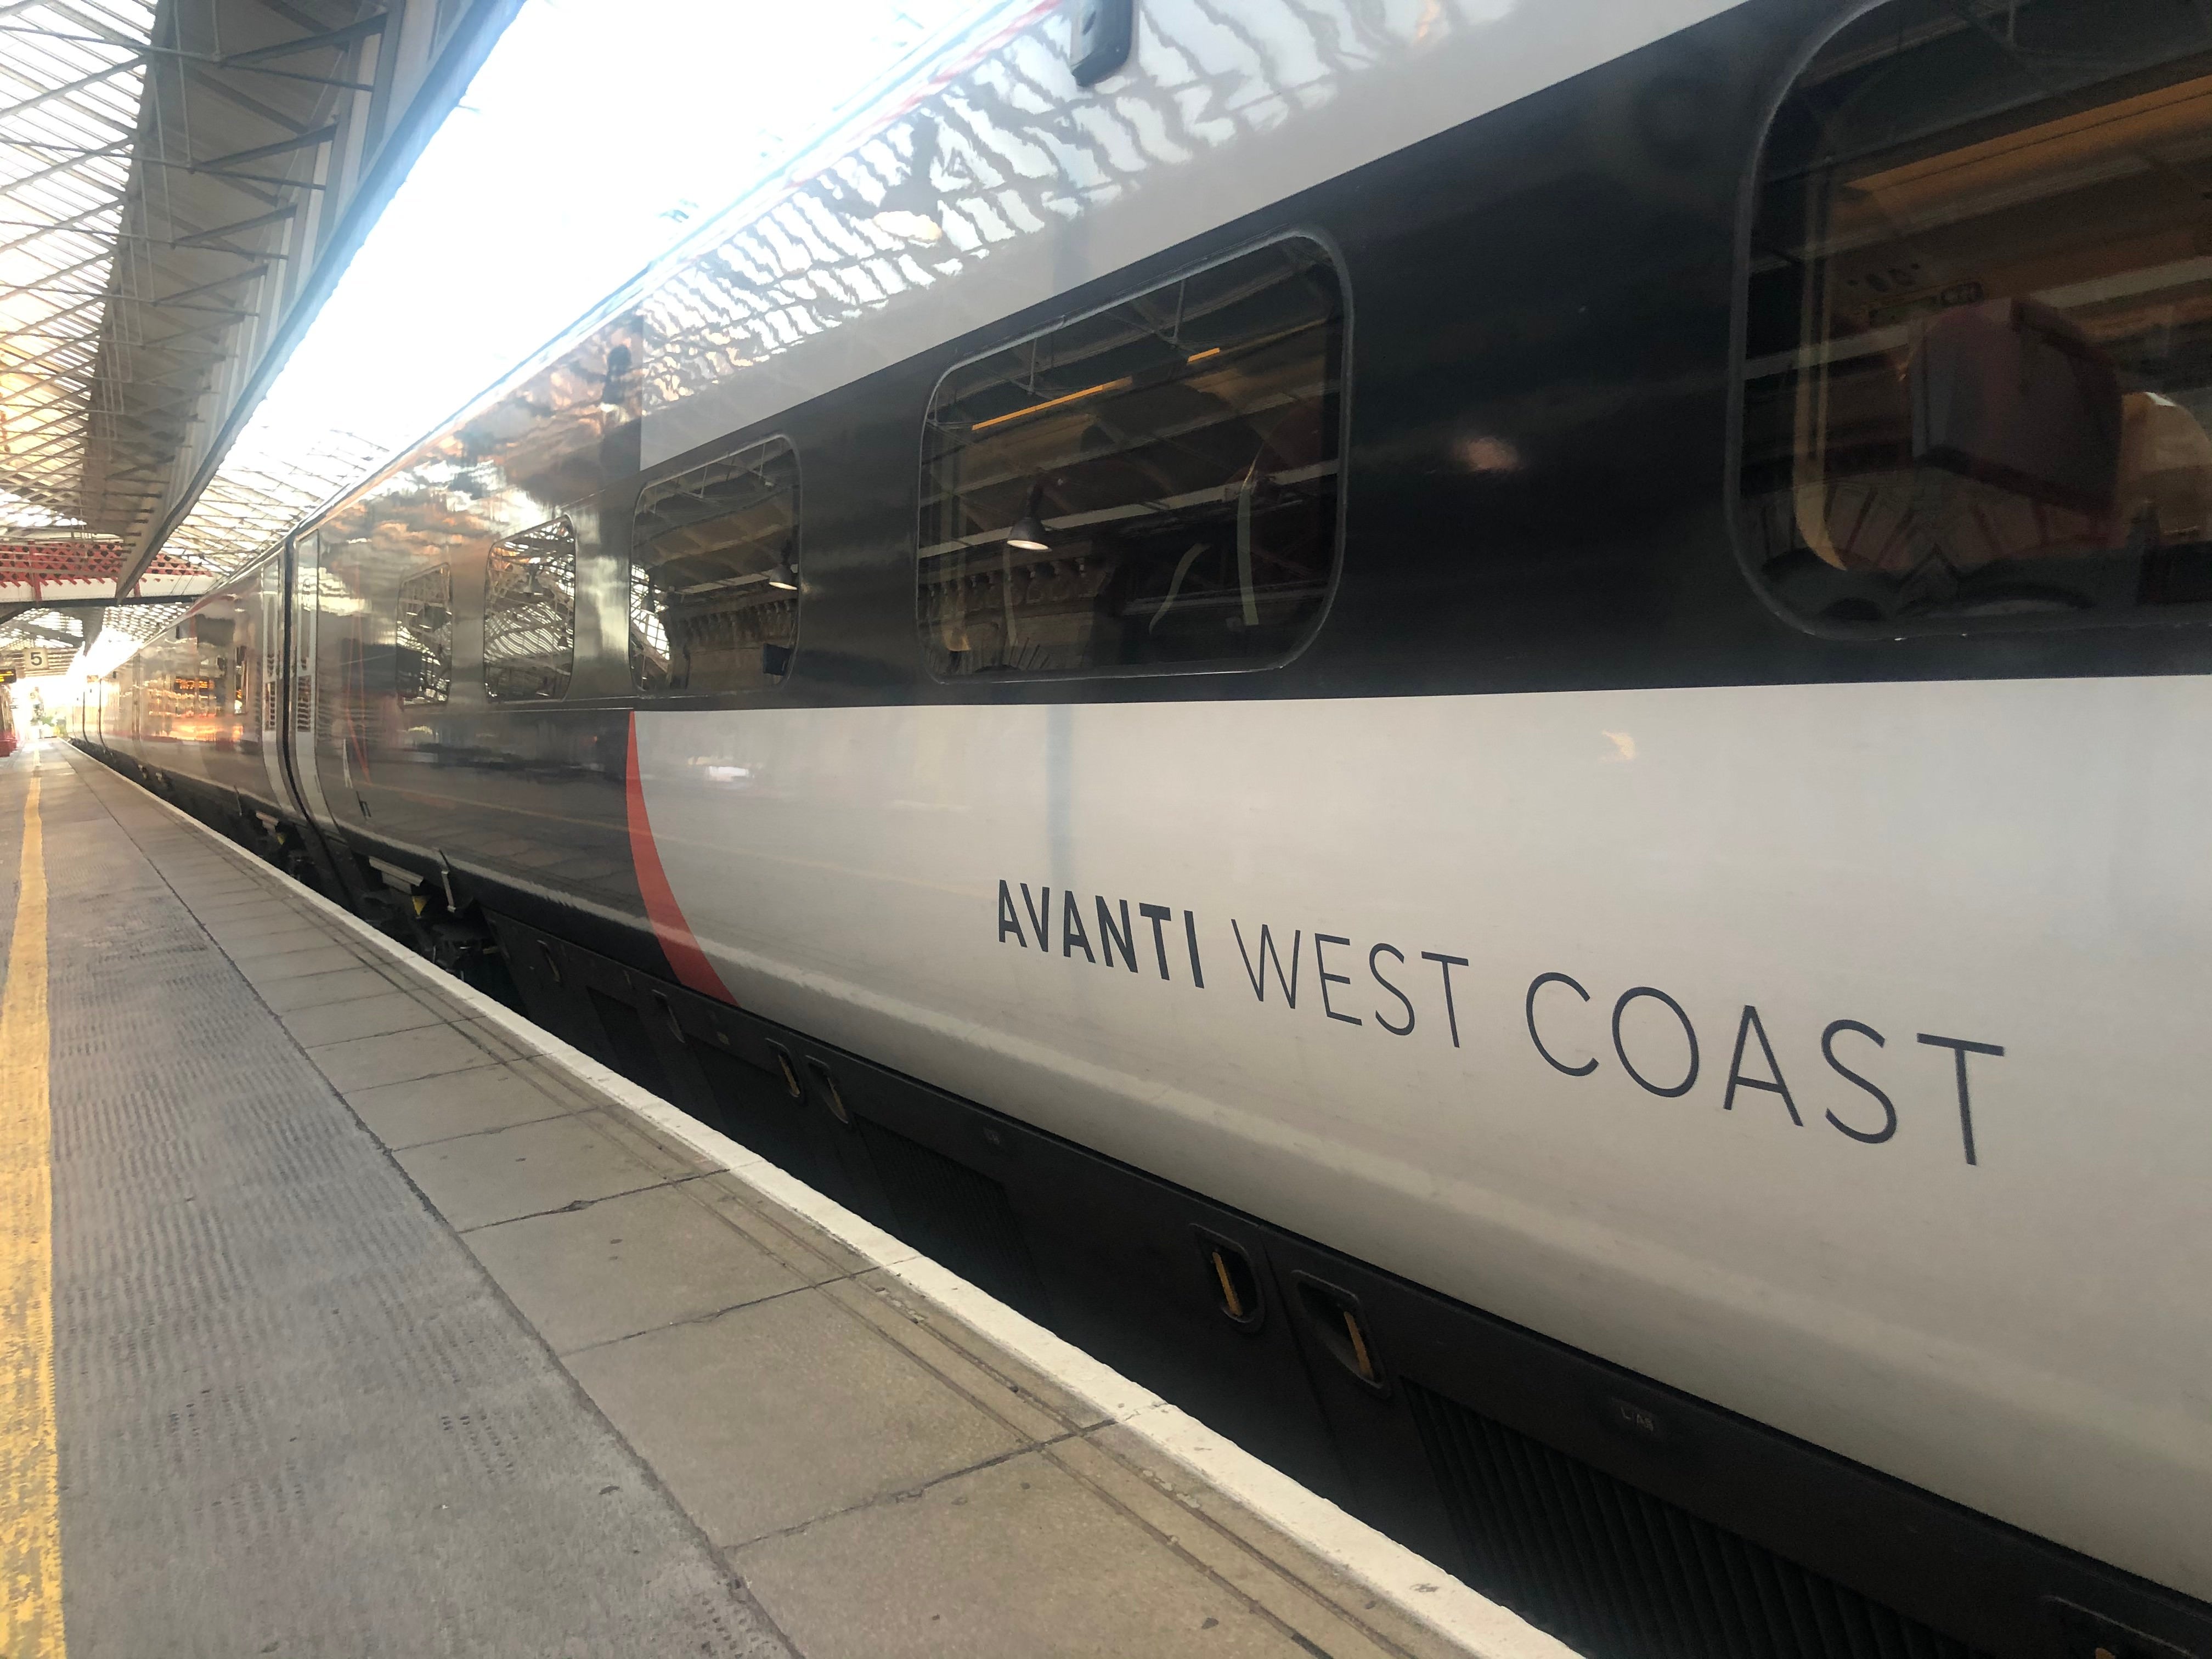 Departing when? Avanti West Coast train at Crewe station in Cheshire